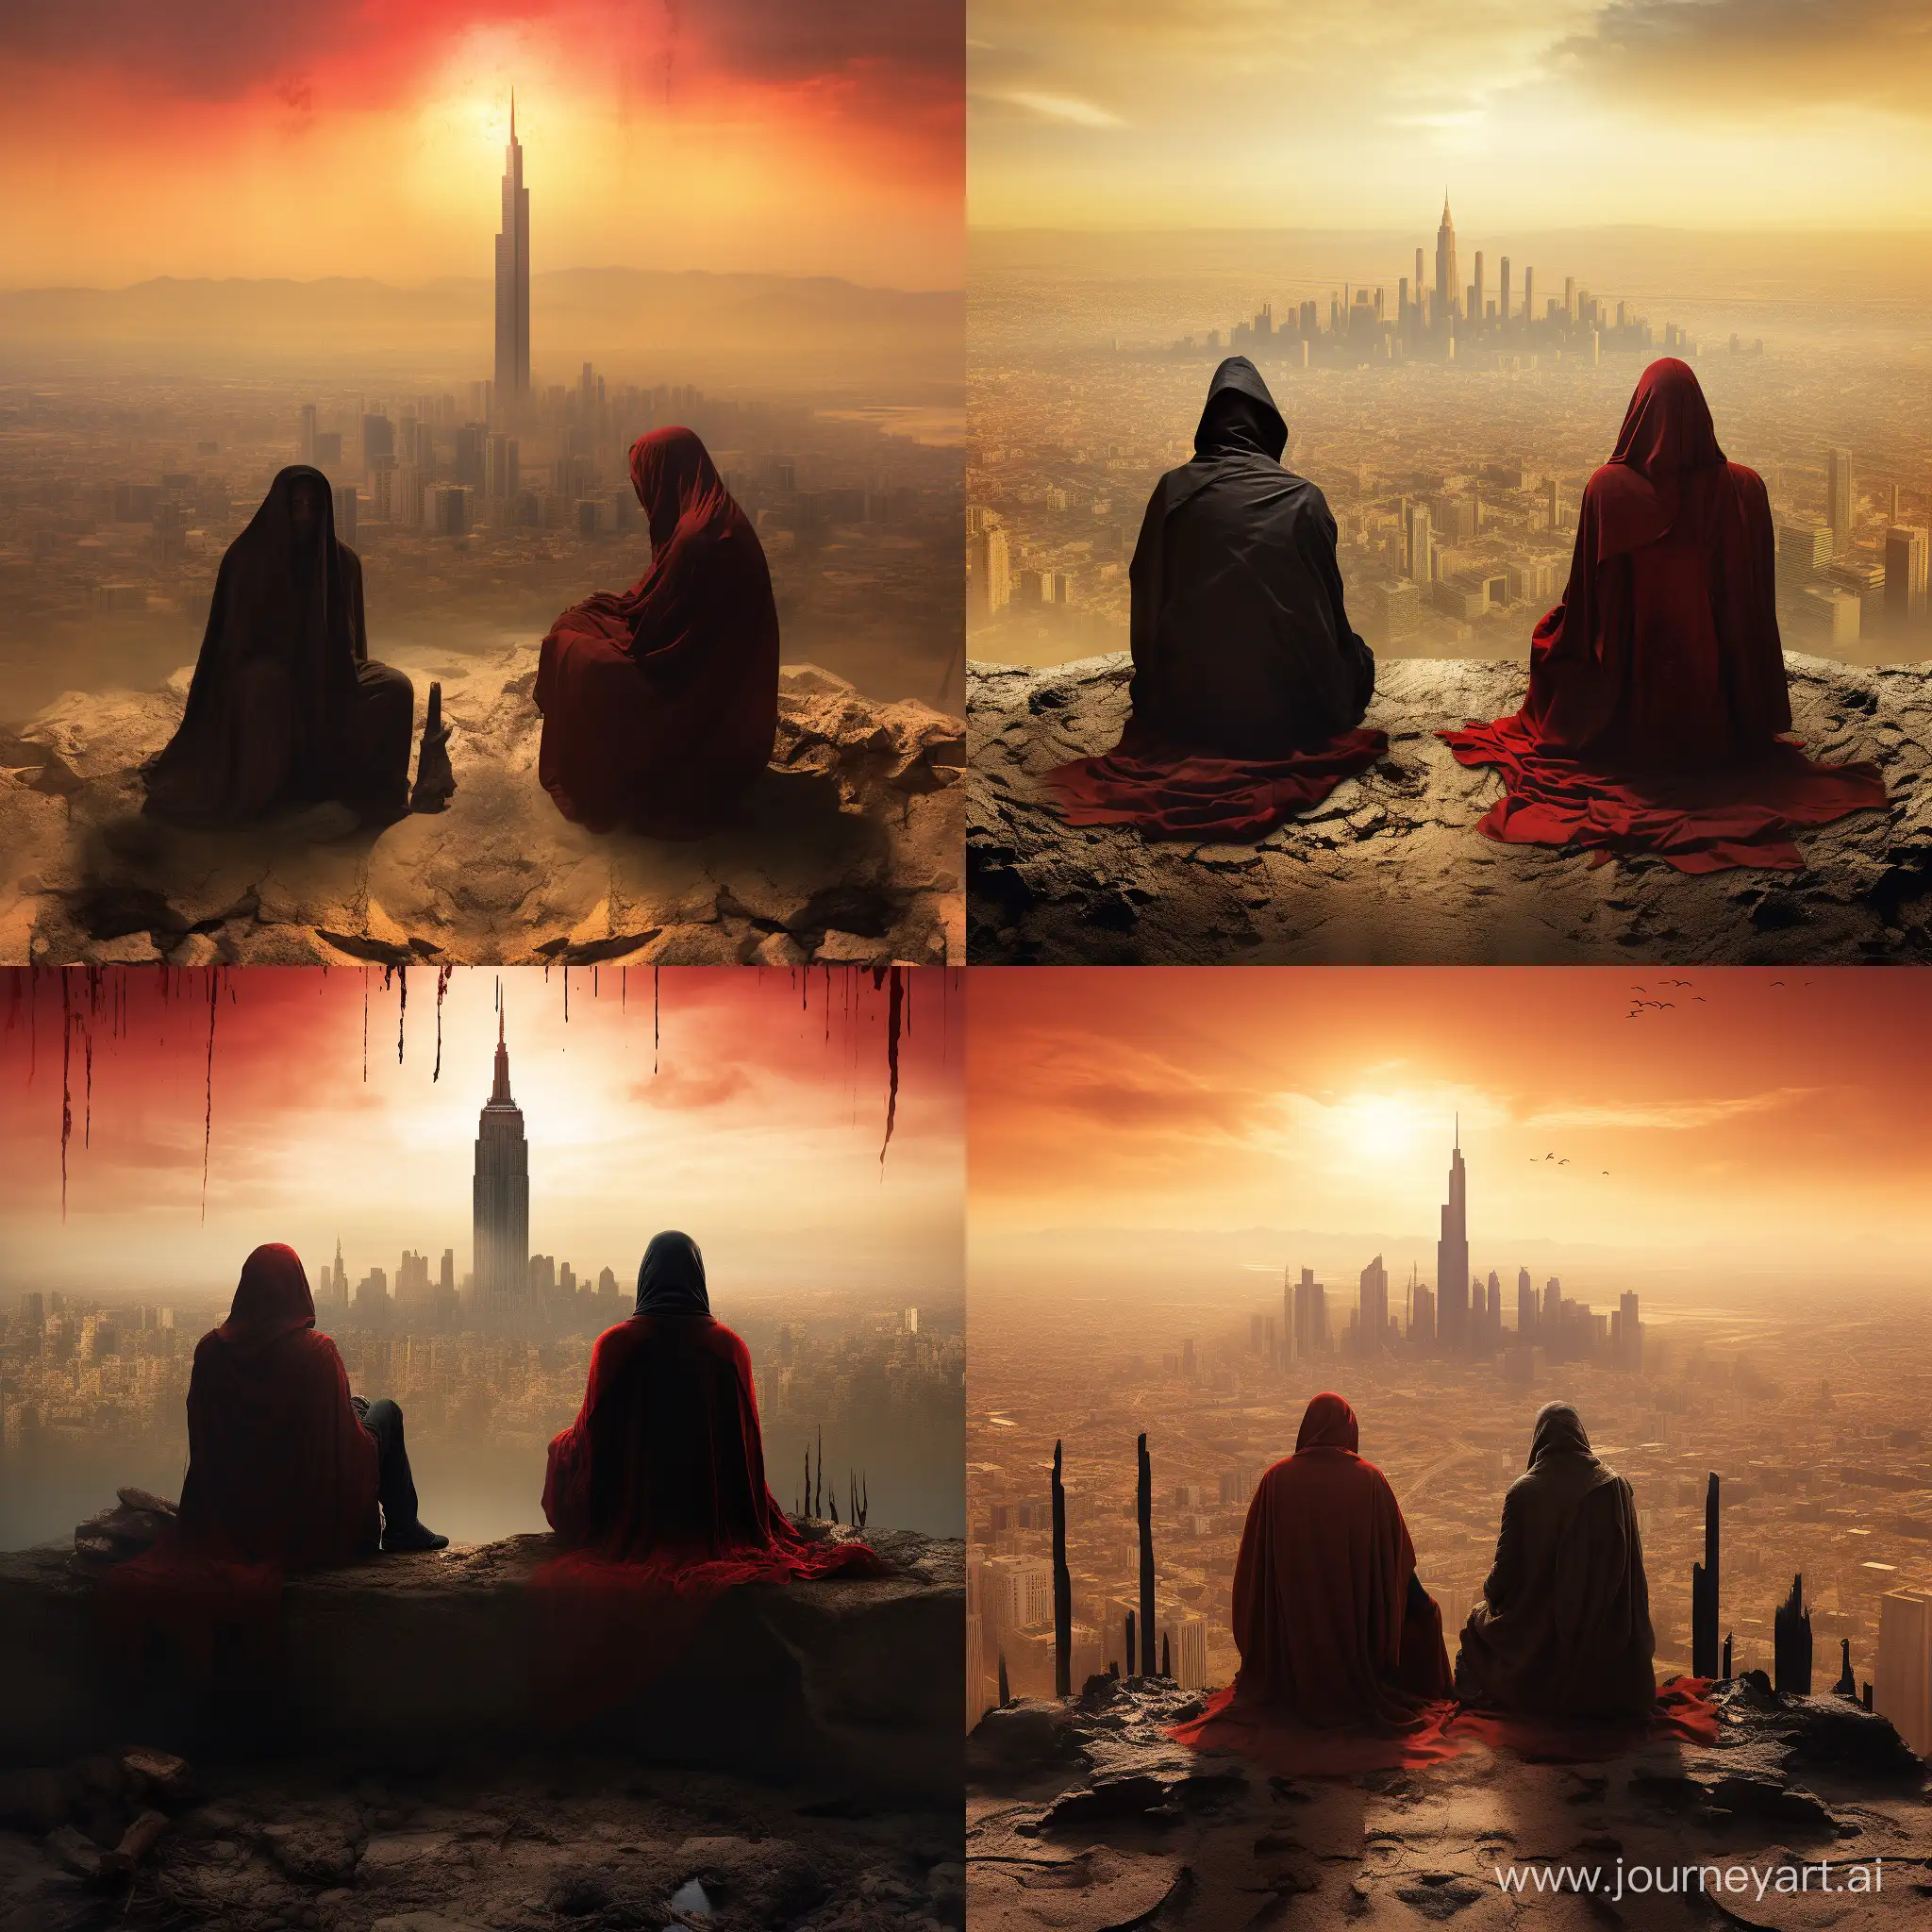 desert, oasis, post-pappocalypse, dawn , Two men, one man in a long cloak, mask on his face, mask red with gold inserts, cape black, second man wearing a jacket, black hair, men sitting on a high tower, ruined skyscraper, hyper-realism, Ultra detail, gloomy atmosphere, 8K image quality